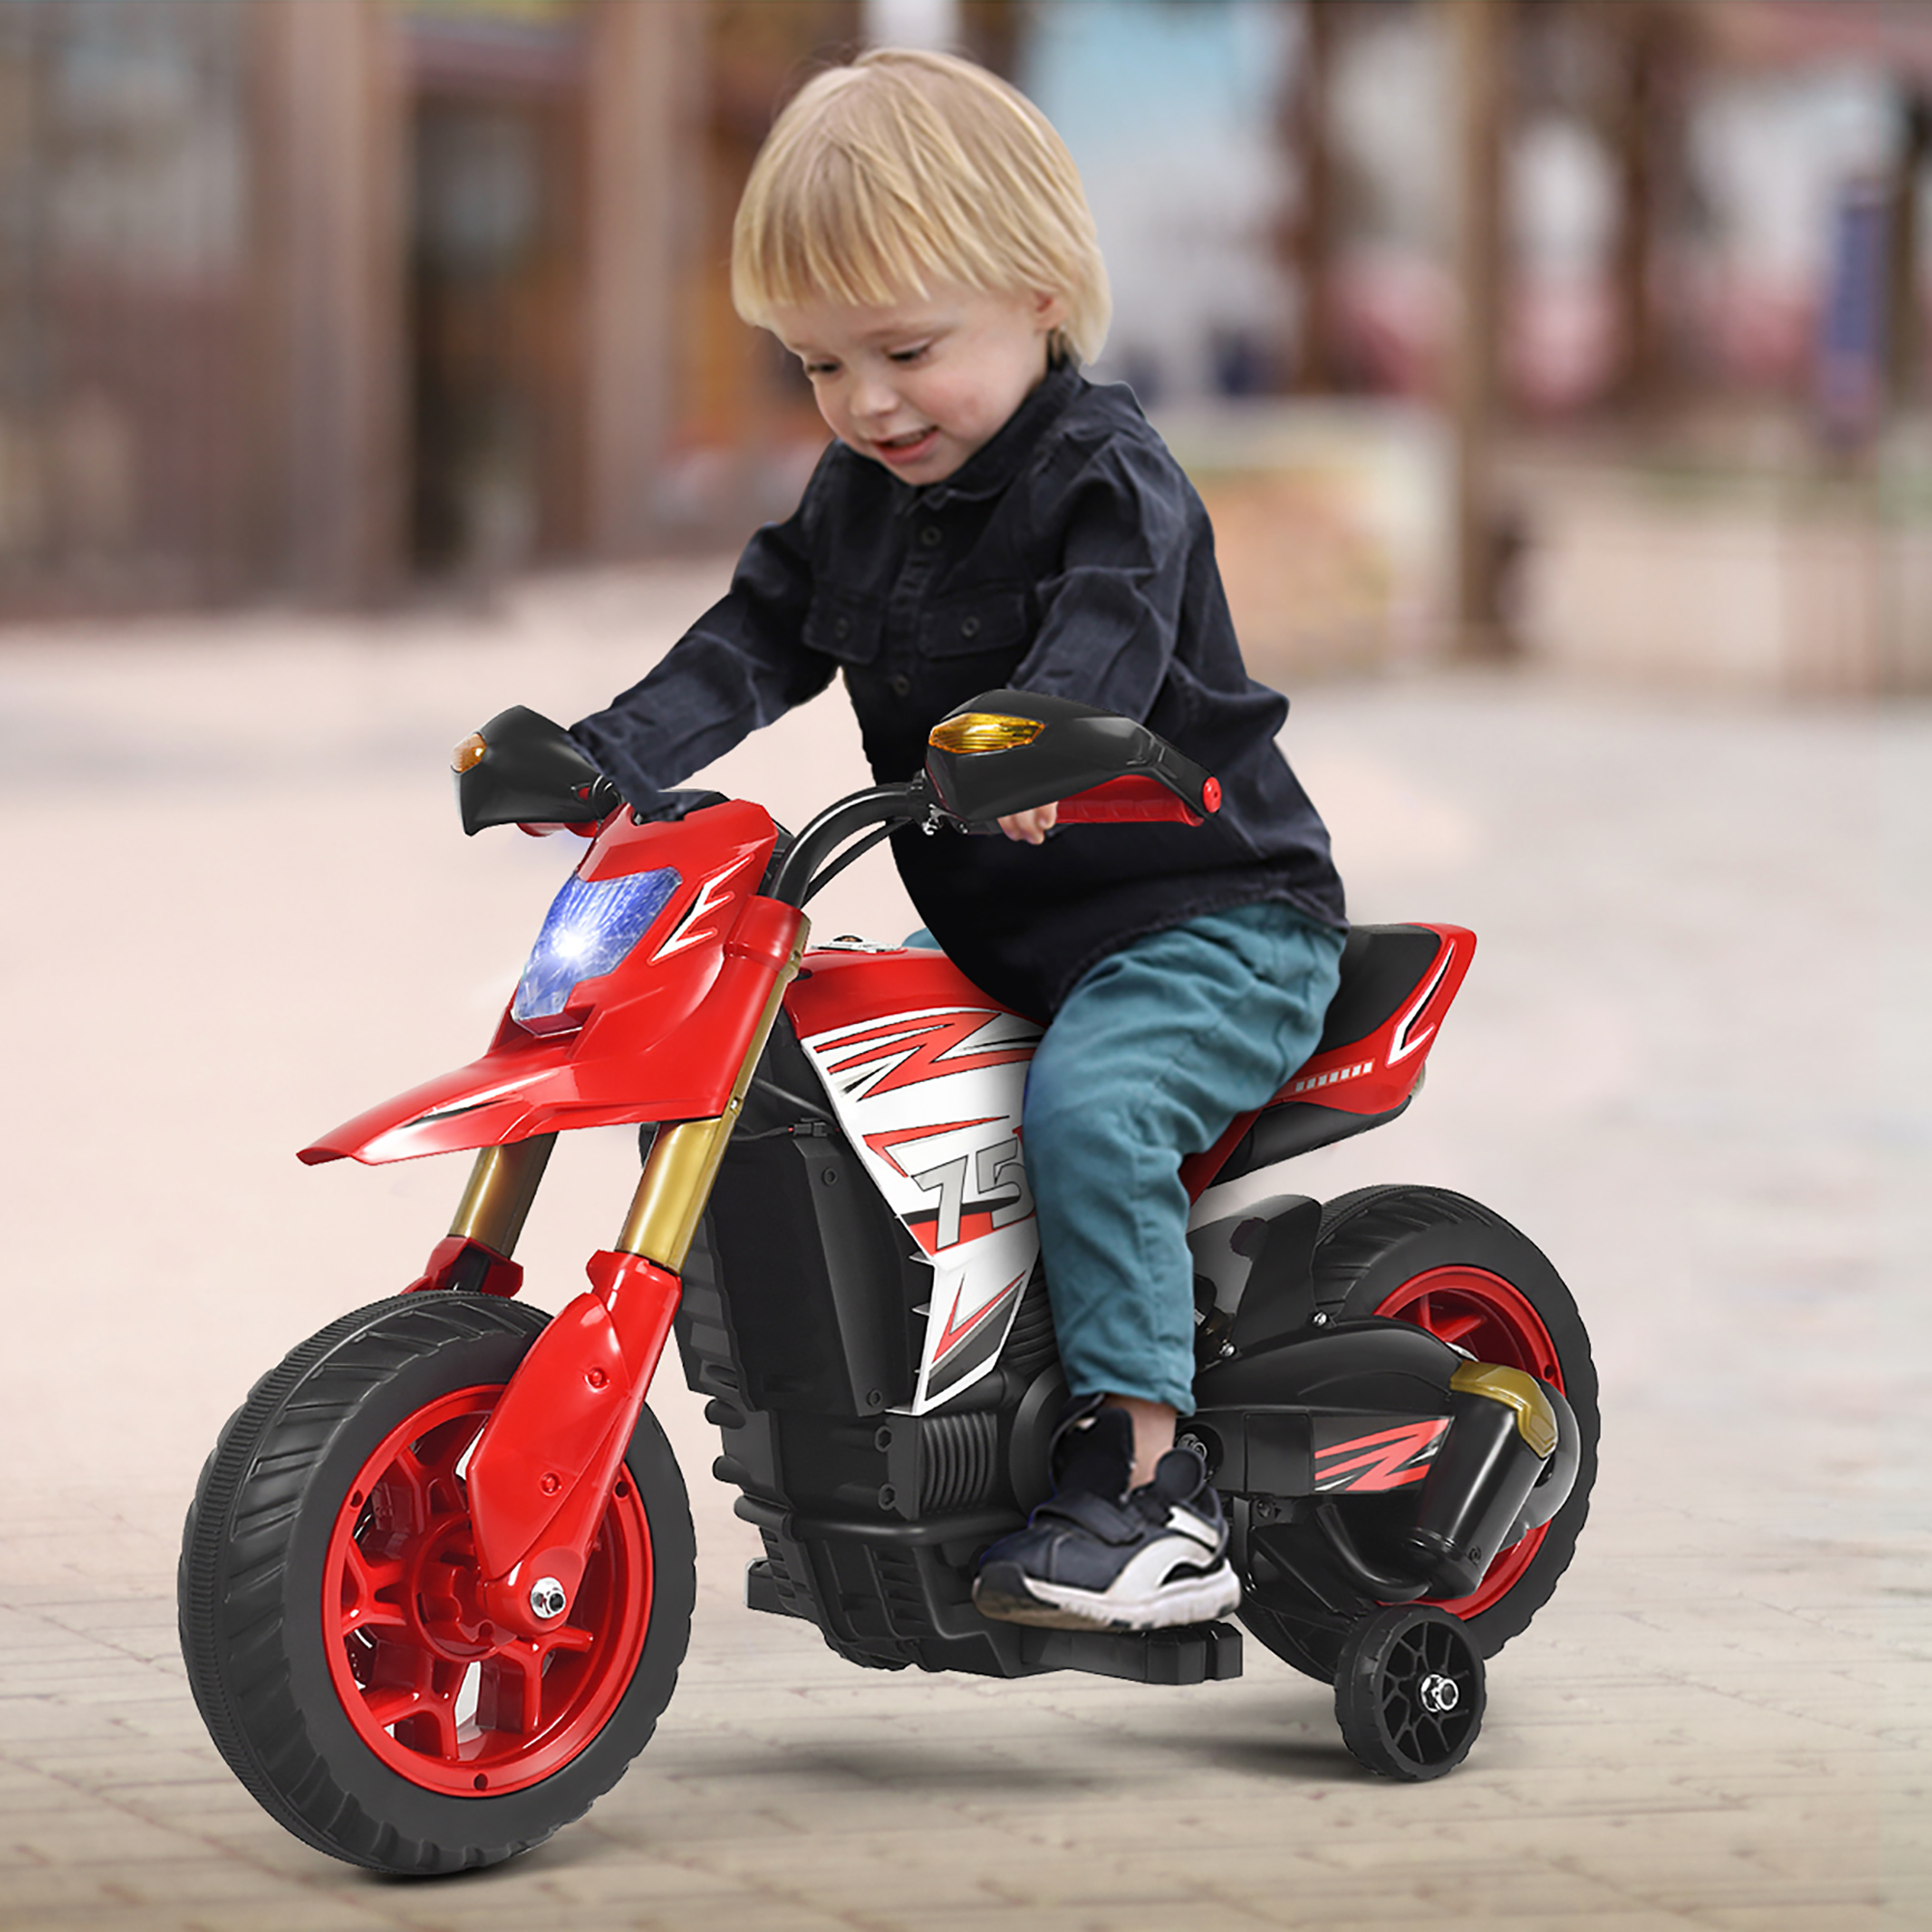 Costway 6V Electric Kids Ride-On Motorcycle Battery Powered Bike w/Training Wheels Red - image 3 of 10